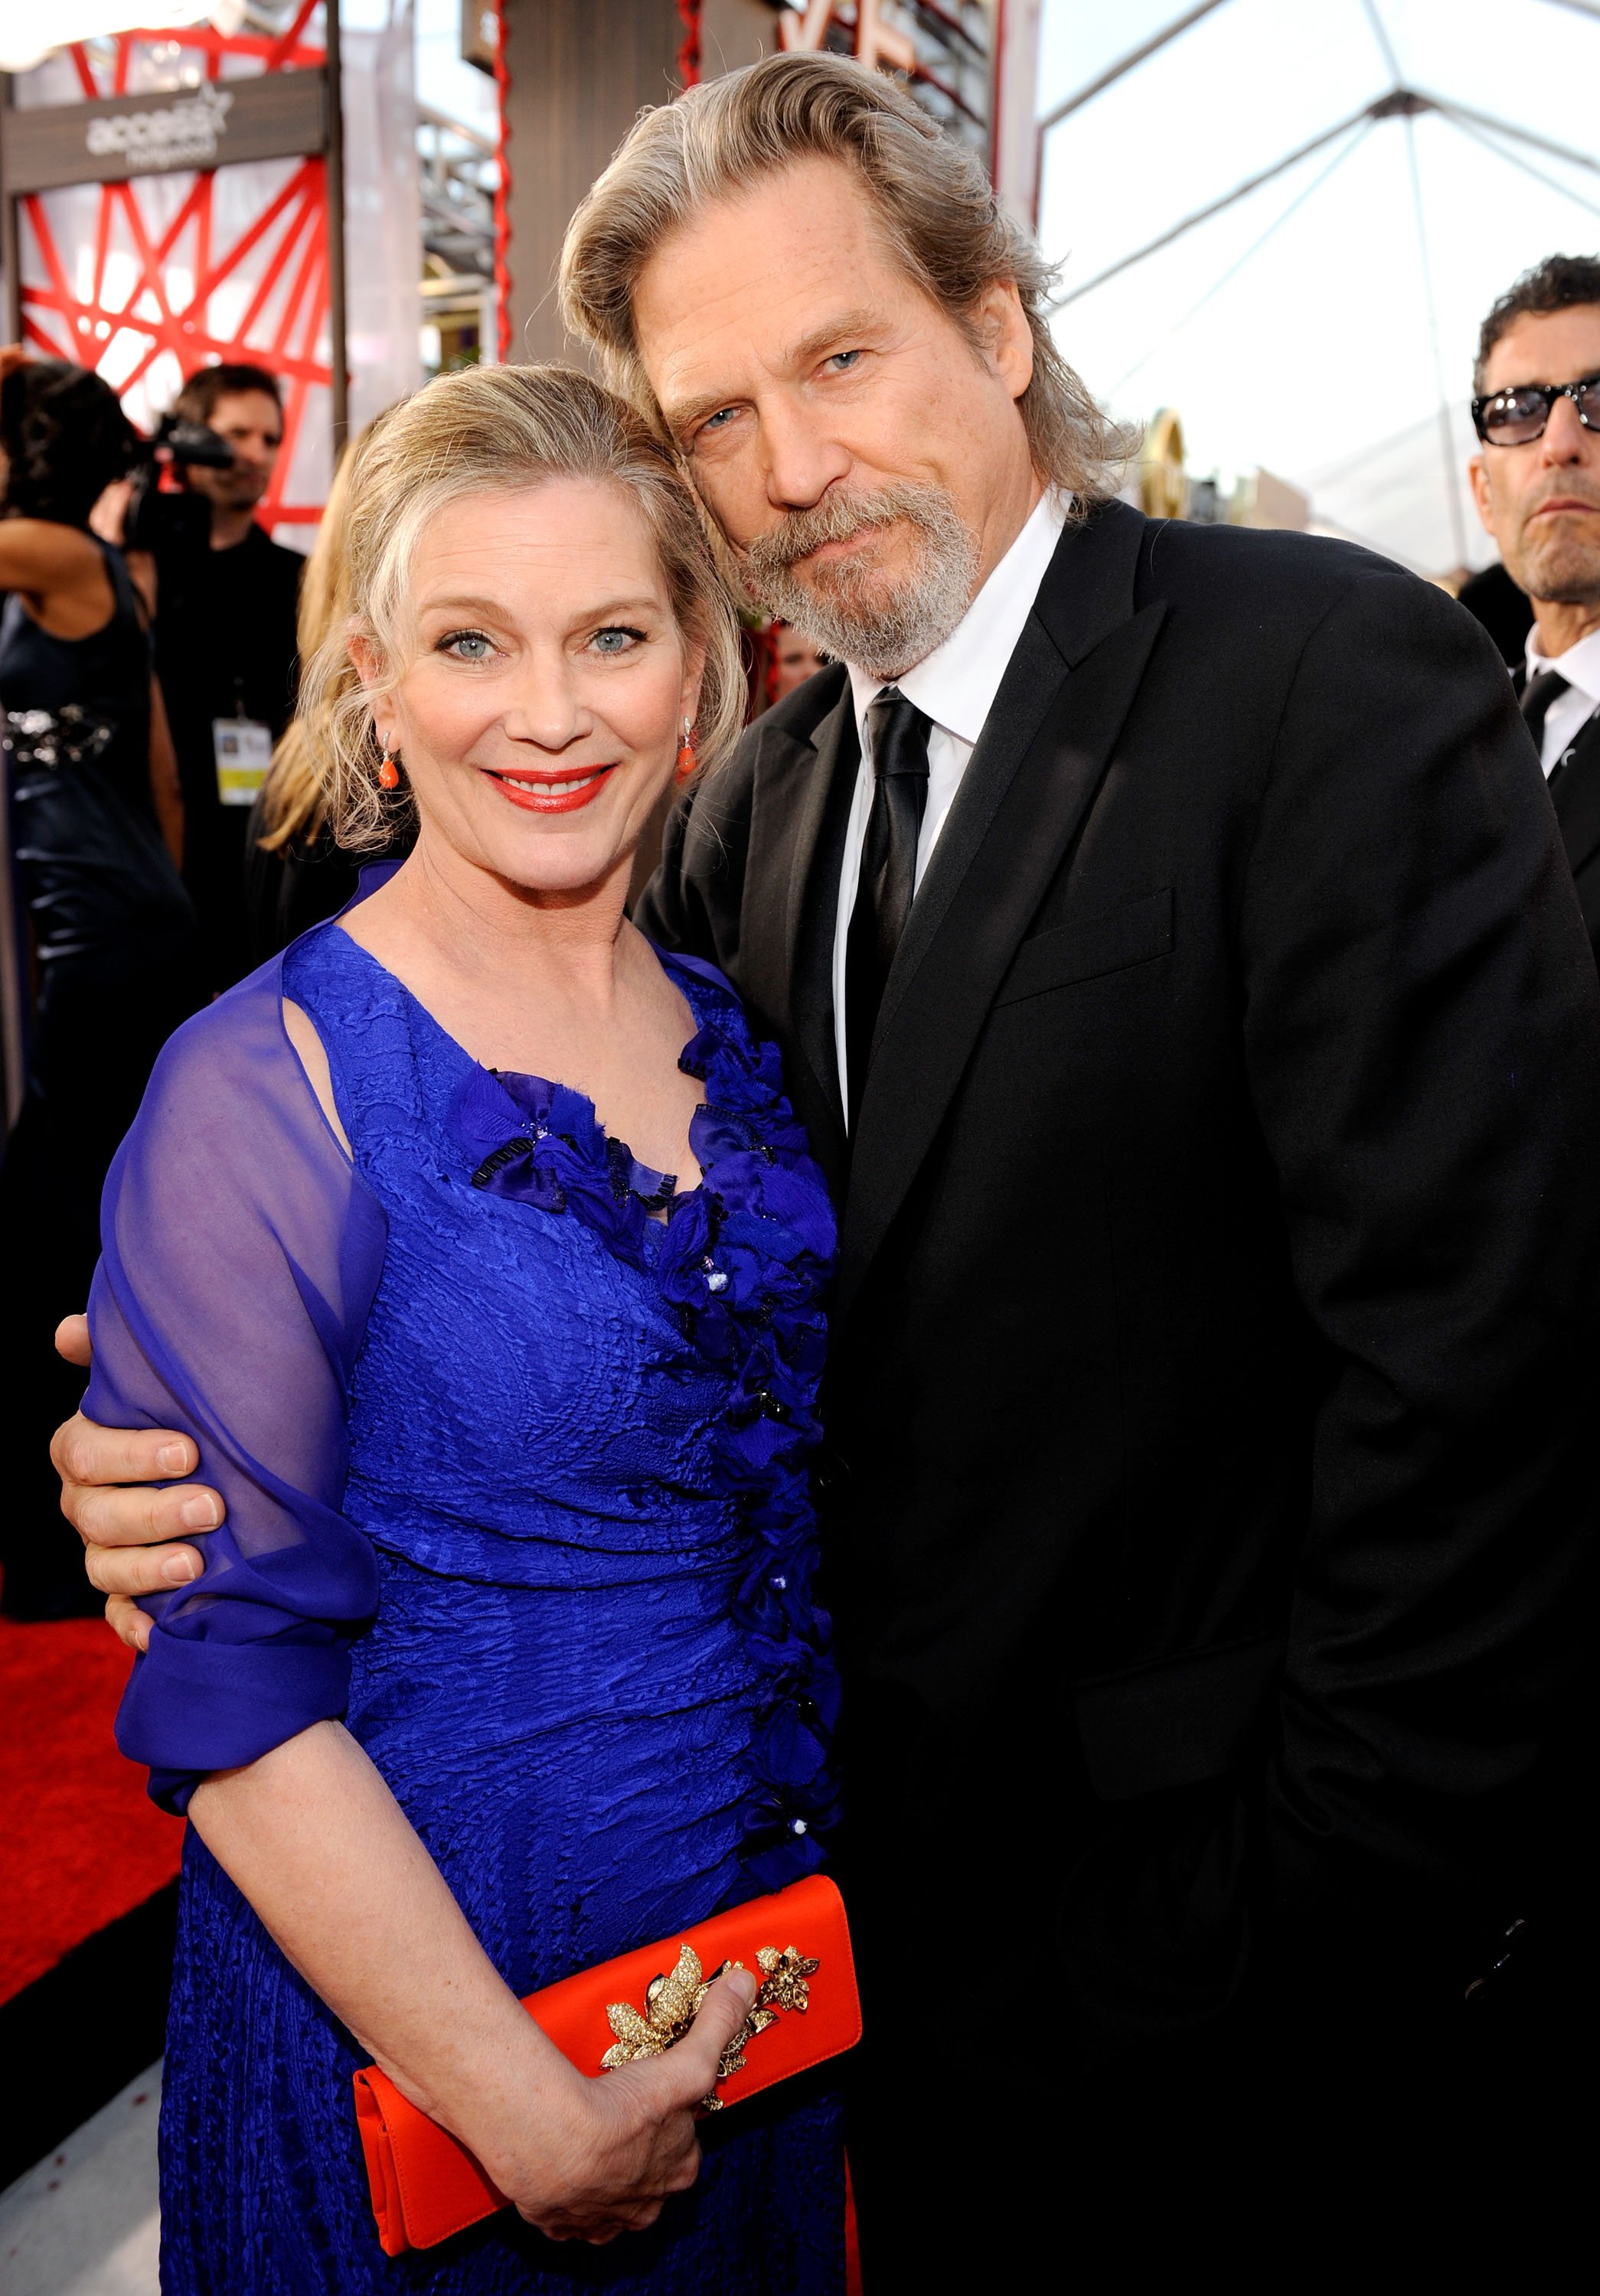 Susan Geston and actor Jeff Bridges arrive at the 16th Annual Screen Actors Guild Awards on January 23, 2010. | Source: Getty Images